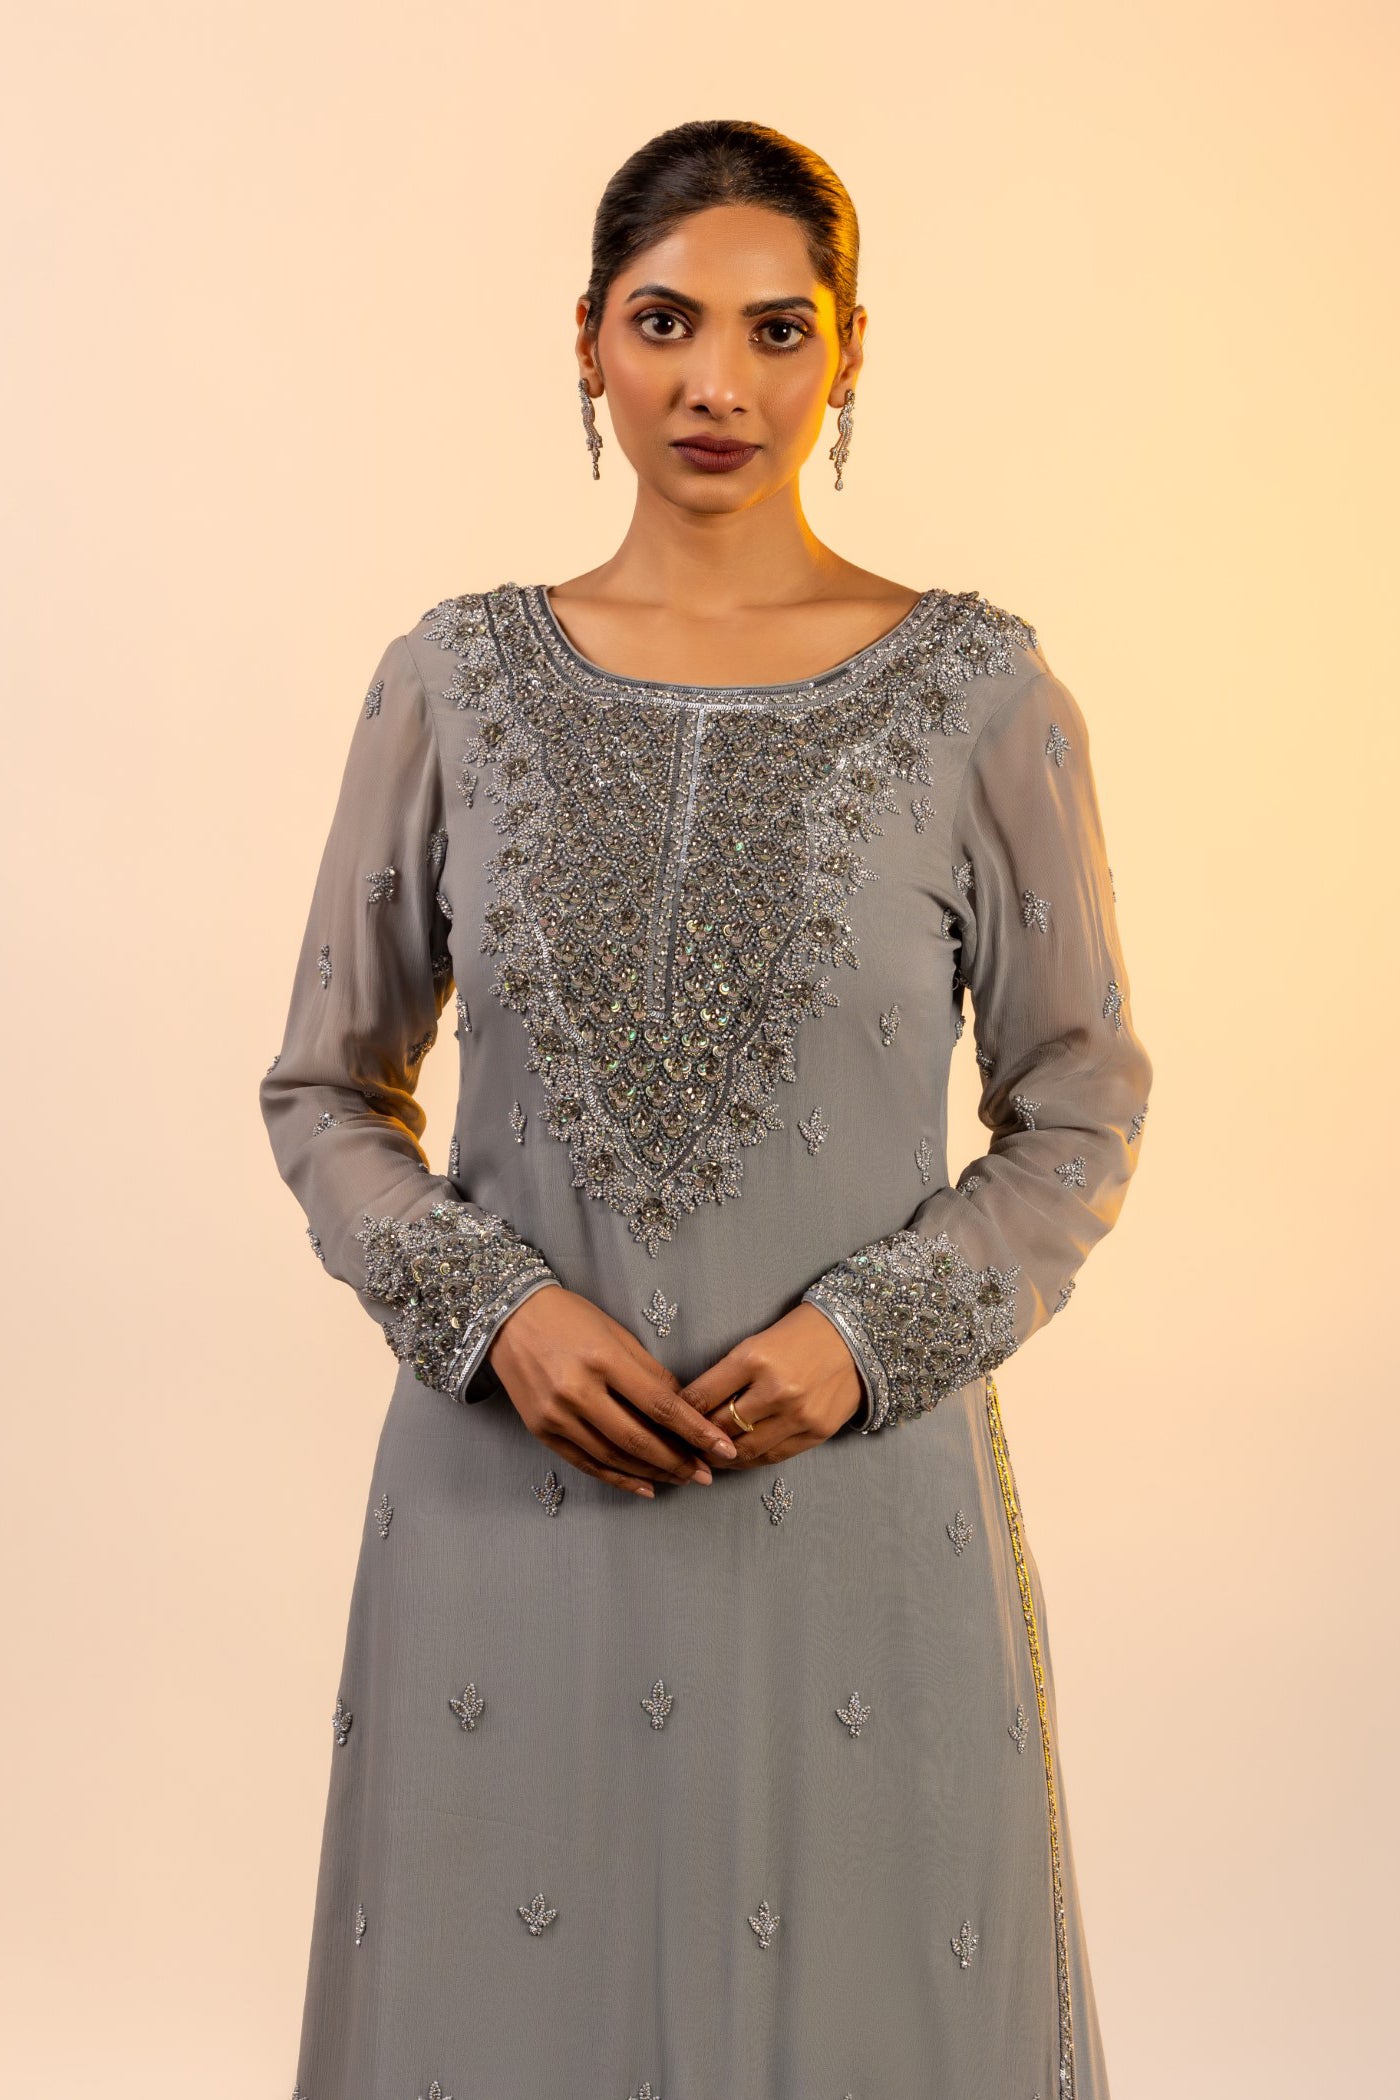 Mauve straight shirt and sharara with sequins work